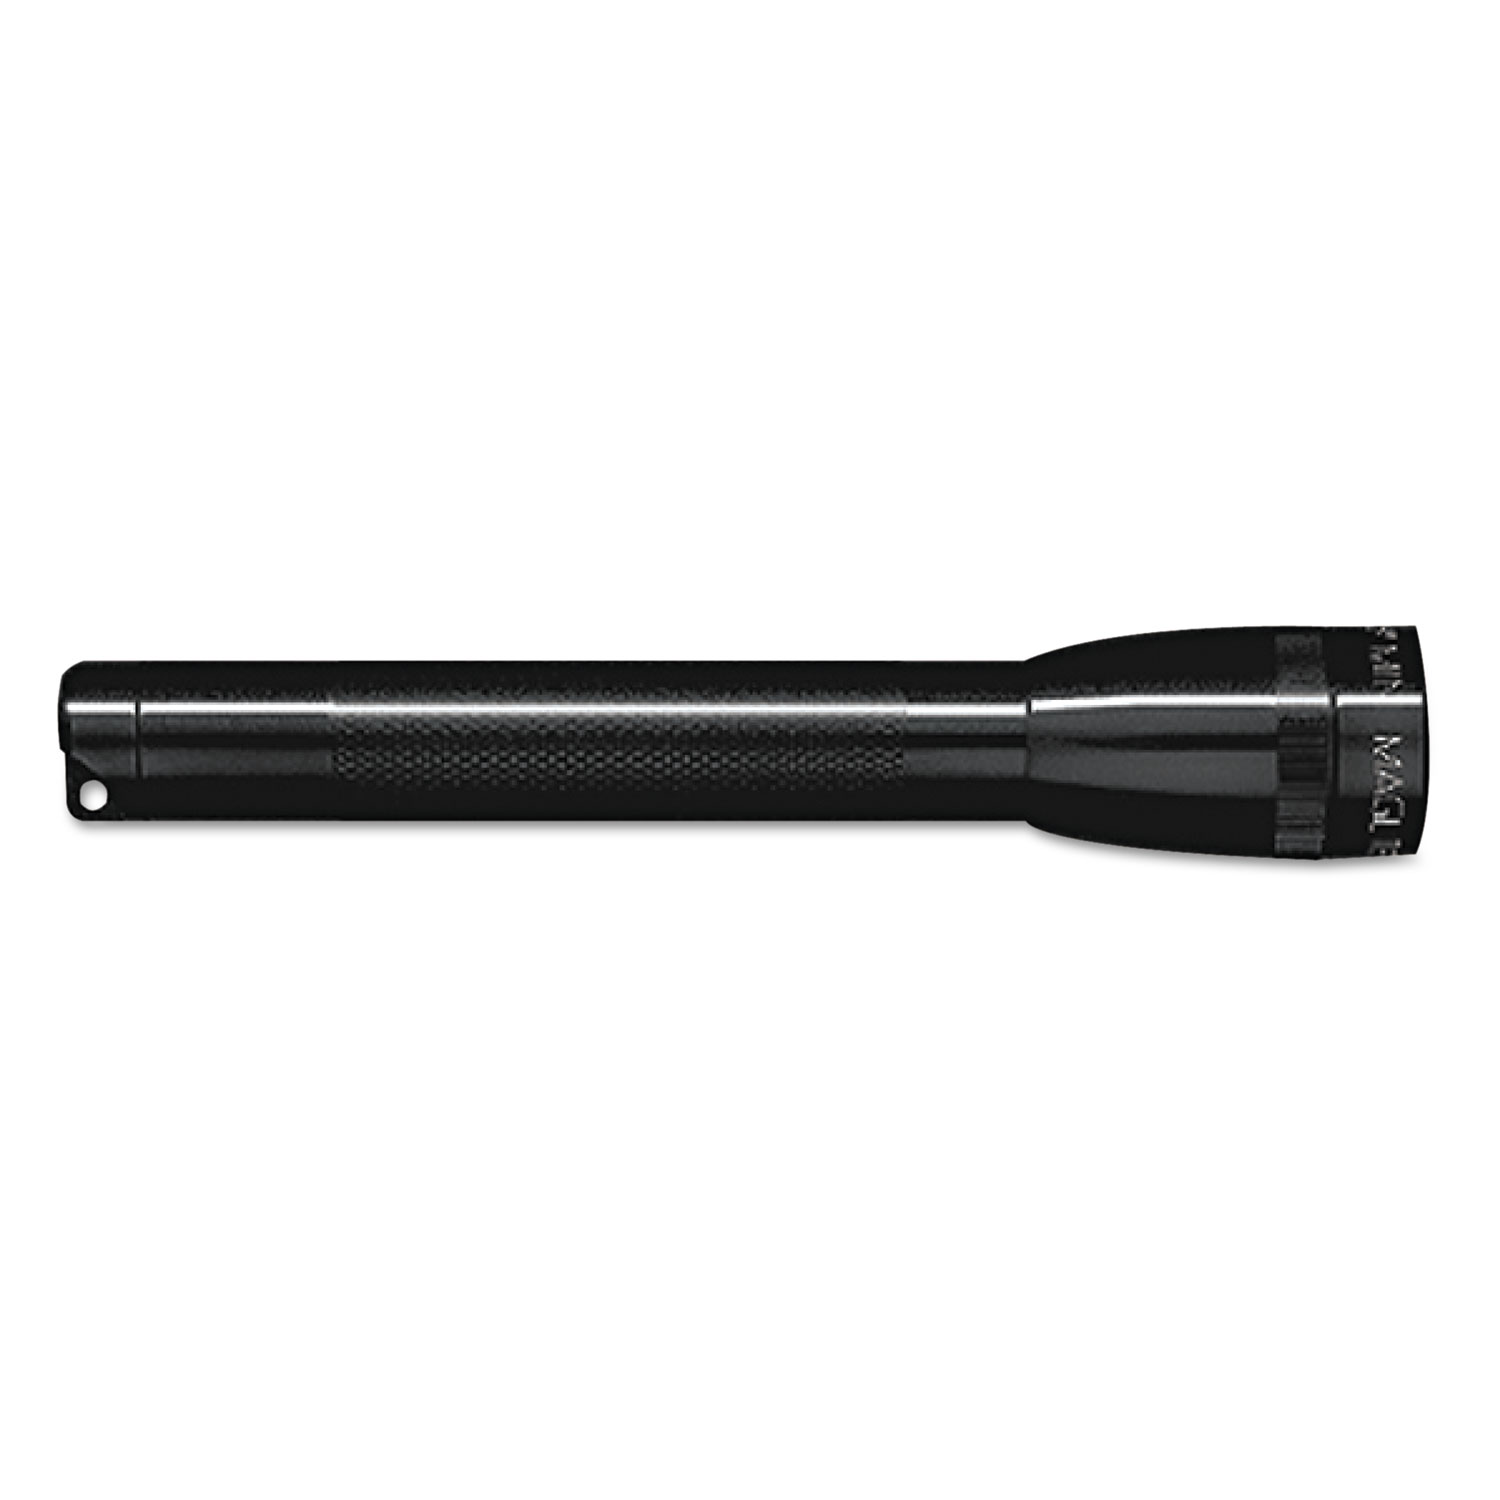  Maglite M2A01H Mini AA Flashlight with Holster, 2 AA Batteries (Included), Black (MGLM2A01H) 